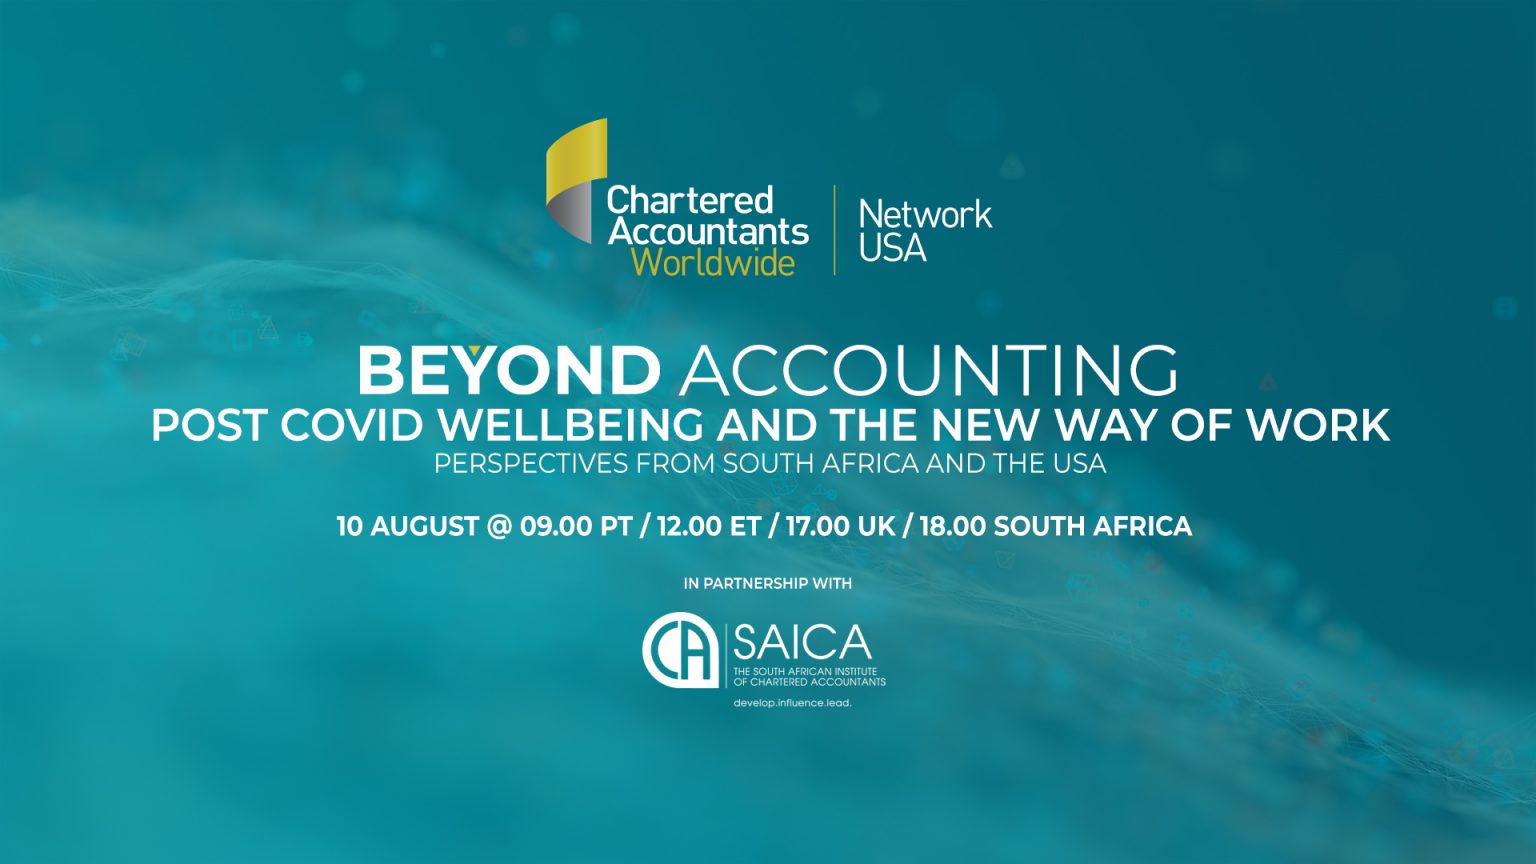 Beyond Accounting – Post COVID wellbeing and the new way of work - A female perspective